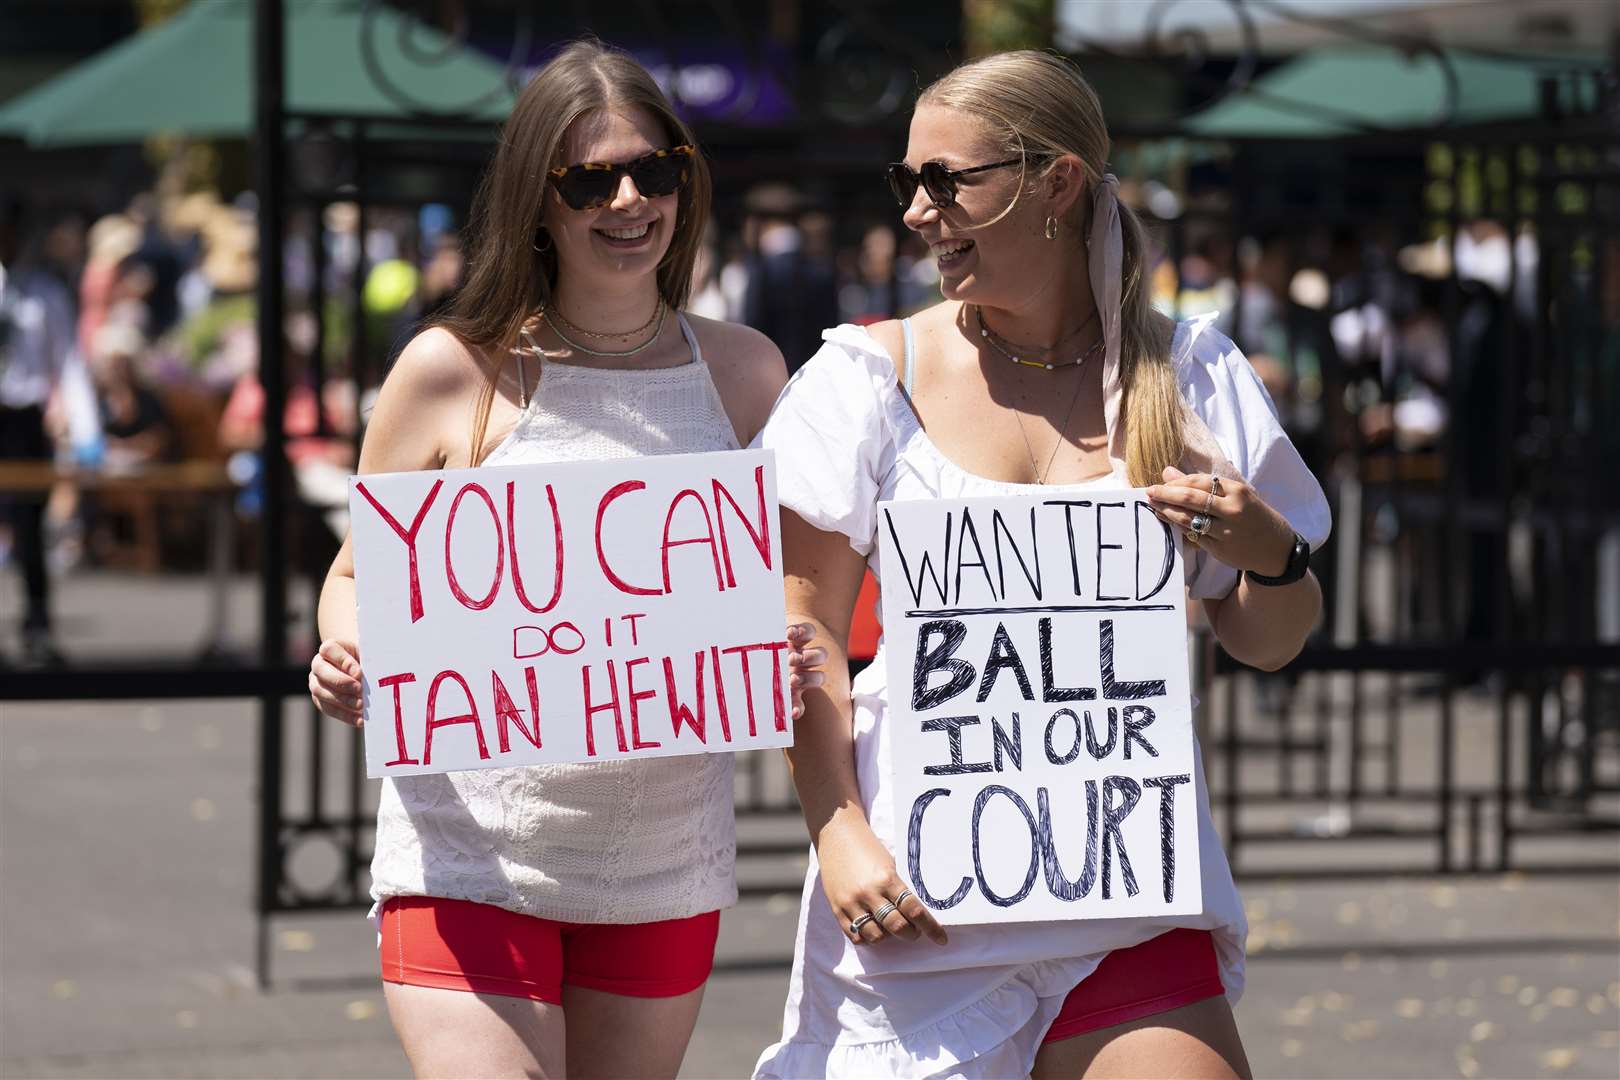 Campaigners from Address The Dress Code outside the main gate at Wimbledon (Kirsty O’Connor/PA)